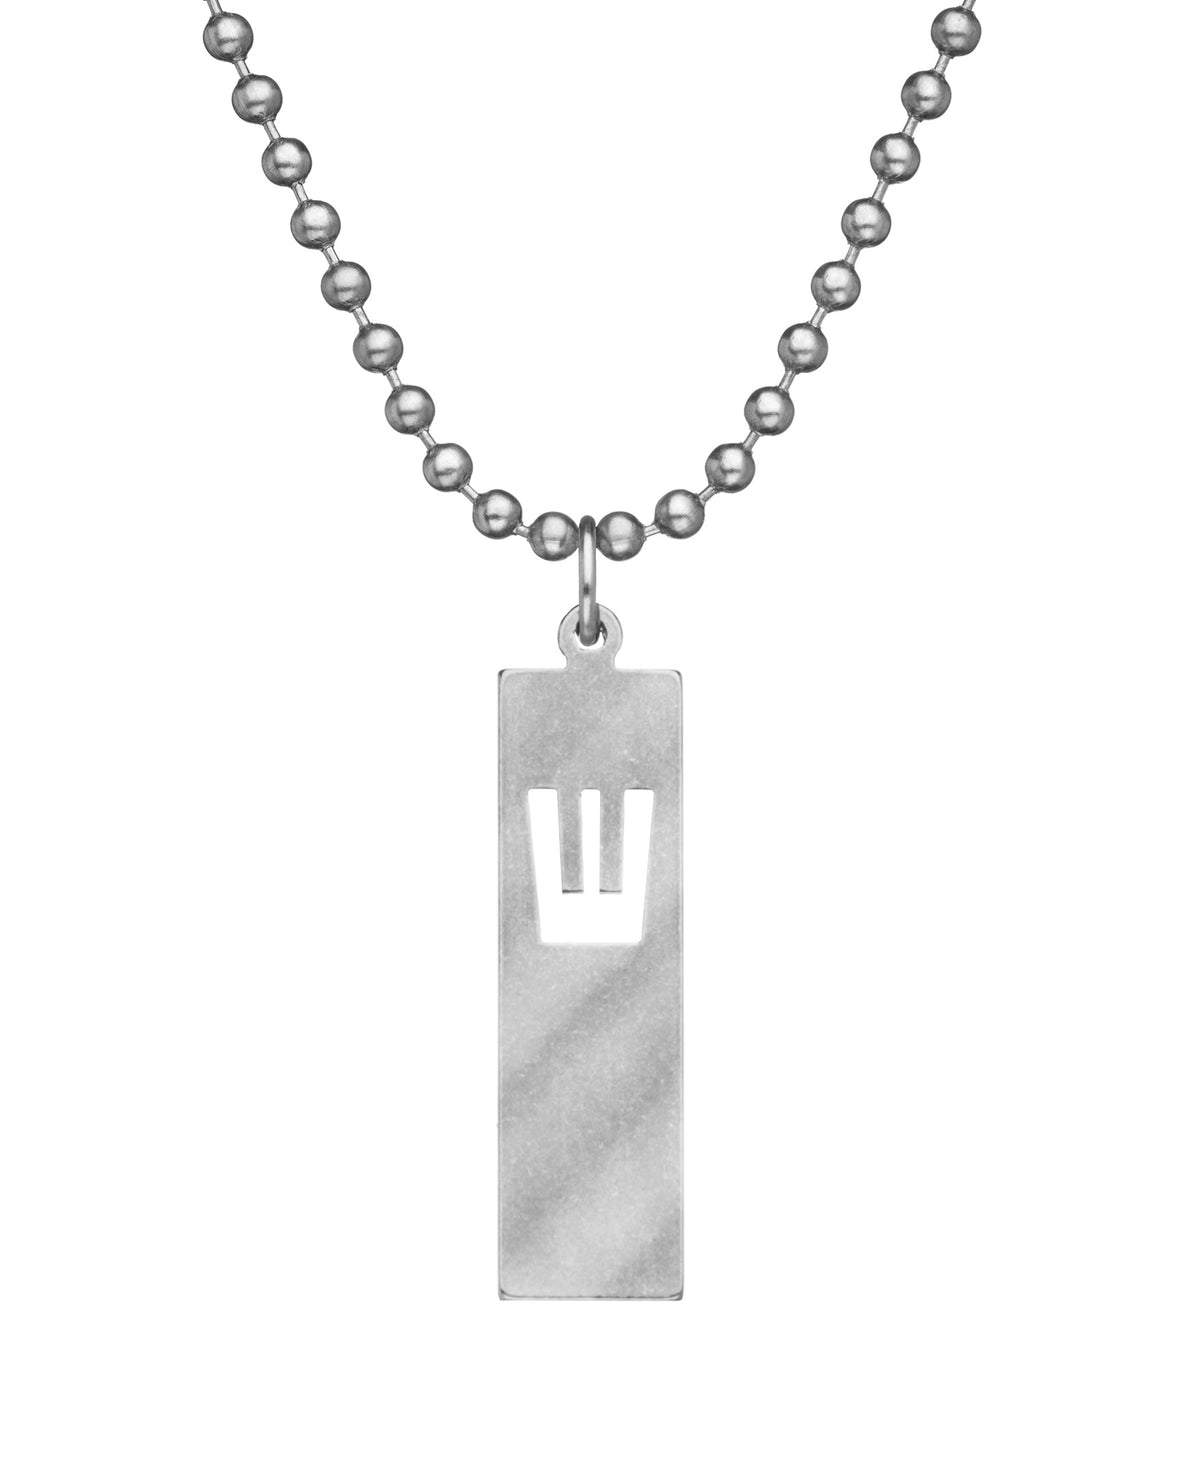 Genuine U.S. Military Issue Mezuzah Necklace with Dog Tag Chain